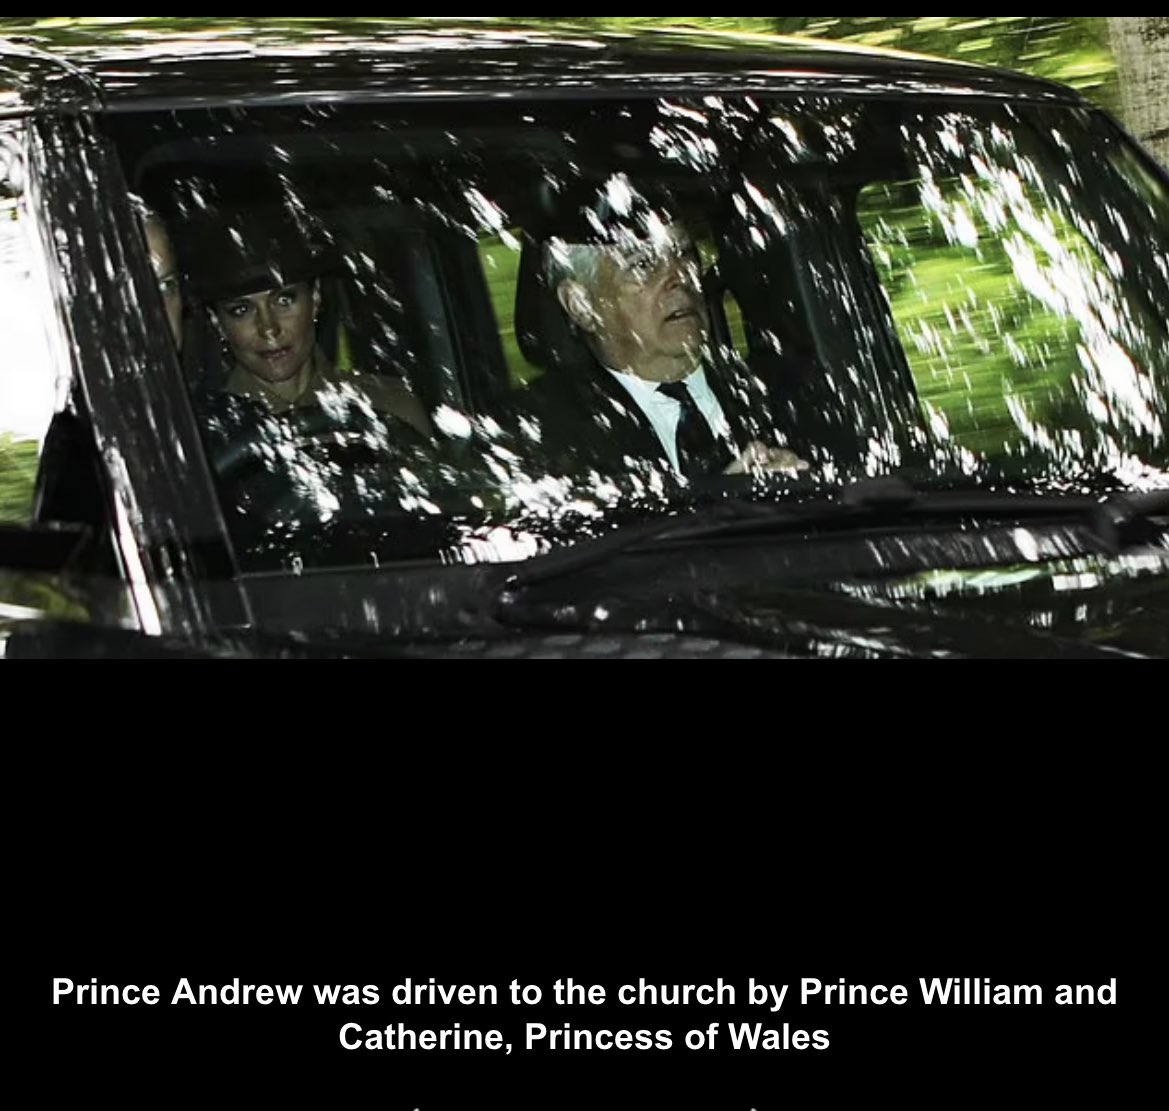 A week after Prince William declined attending the women's football world cup finals in Australia, he is driving his beloved uncle #PrinceAndrew to church today. Prince William is publicly supporting an alleged rapist, while snobbing the English women's football team.